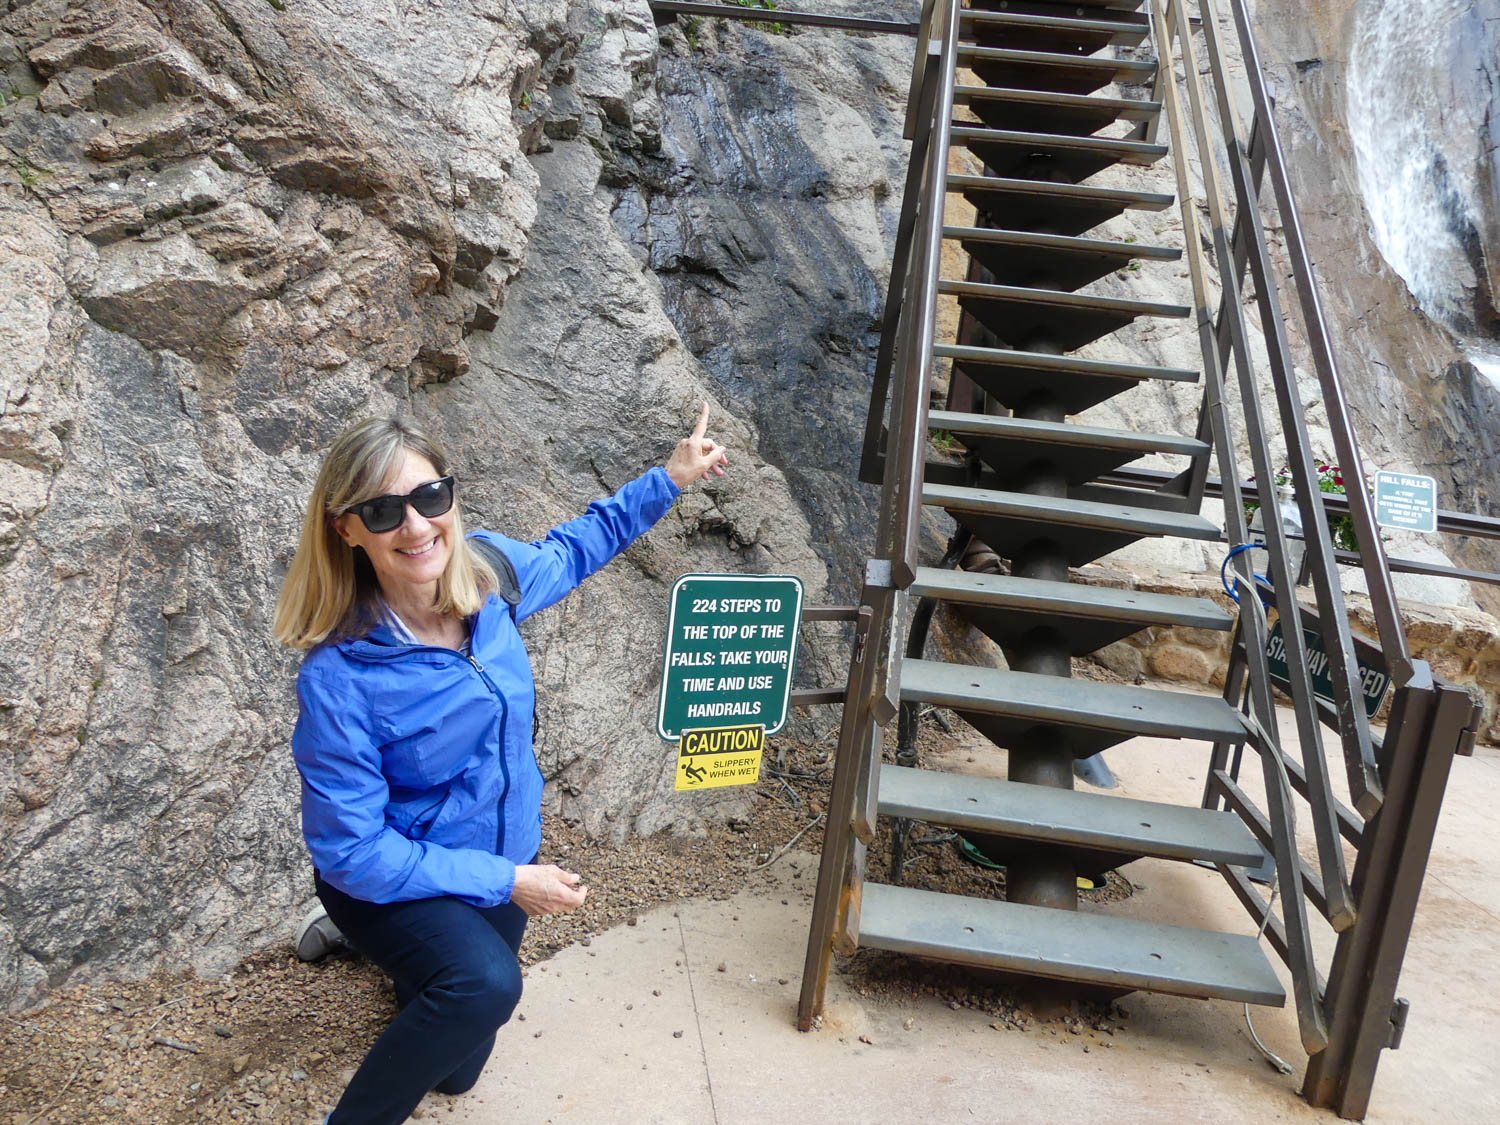 Author Sherry Spitsnaugle gets ready to climb the steps at Seven Falls.